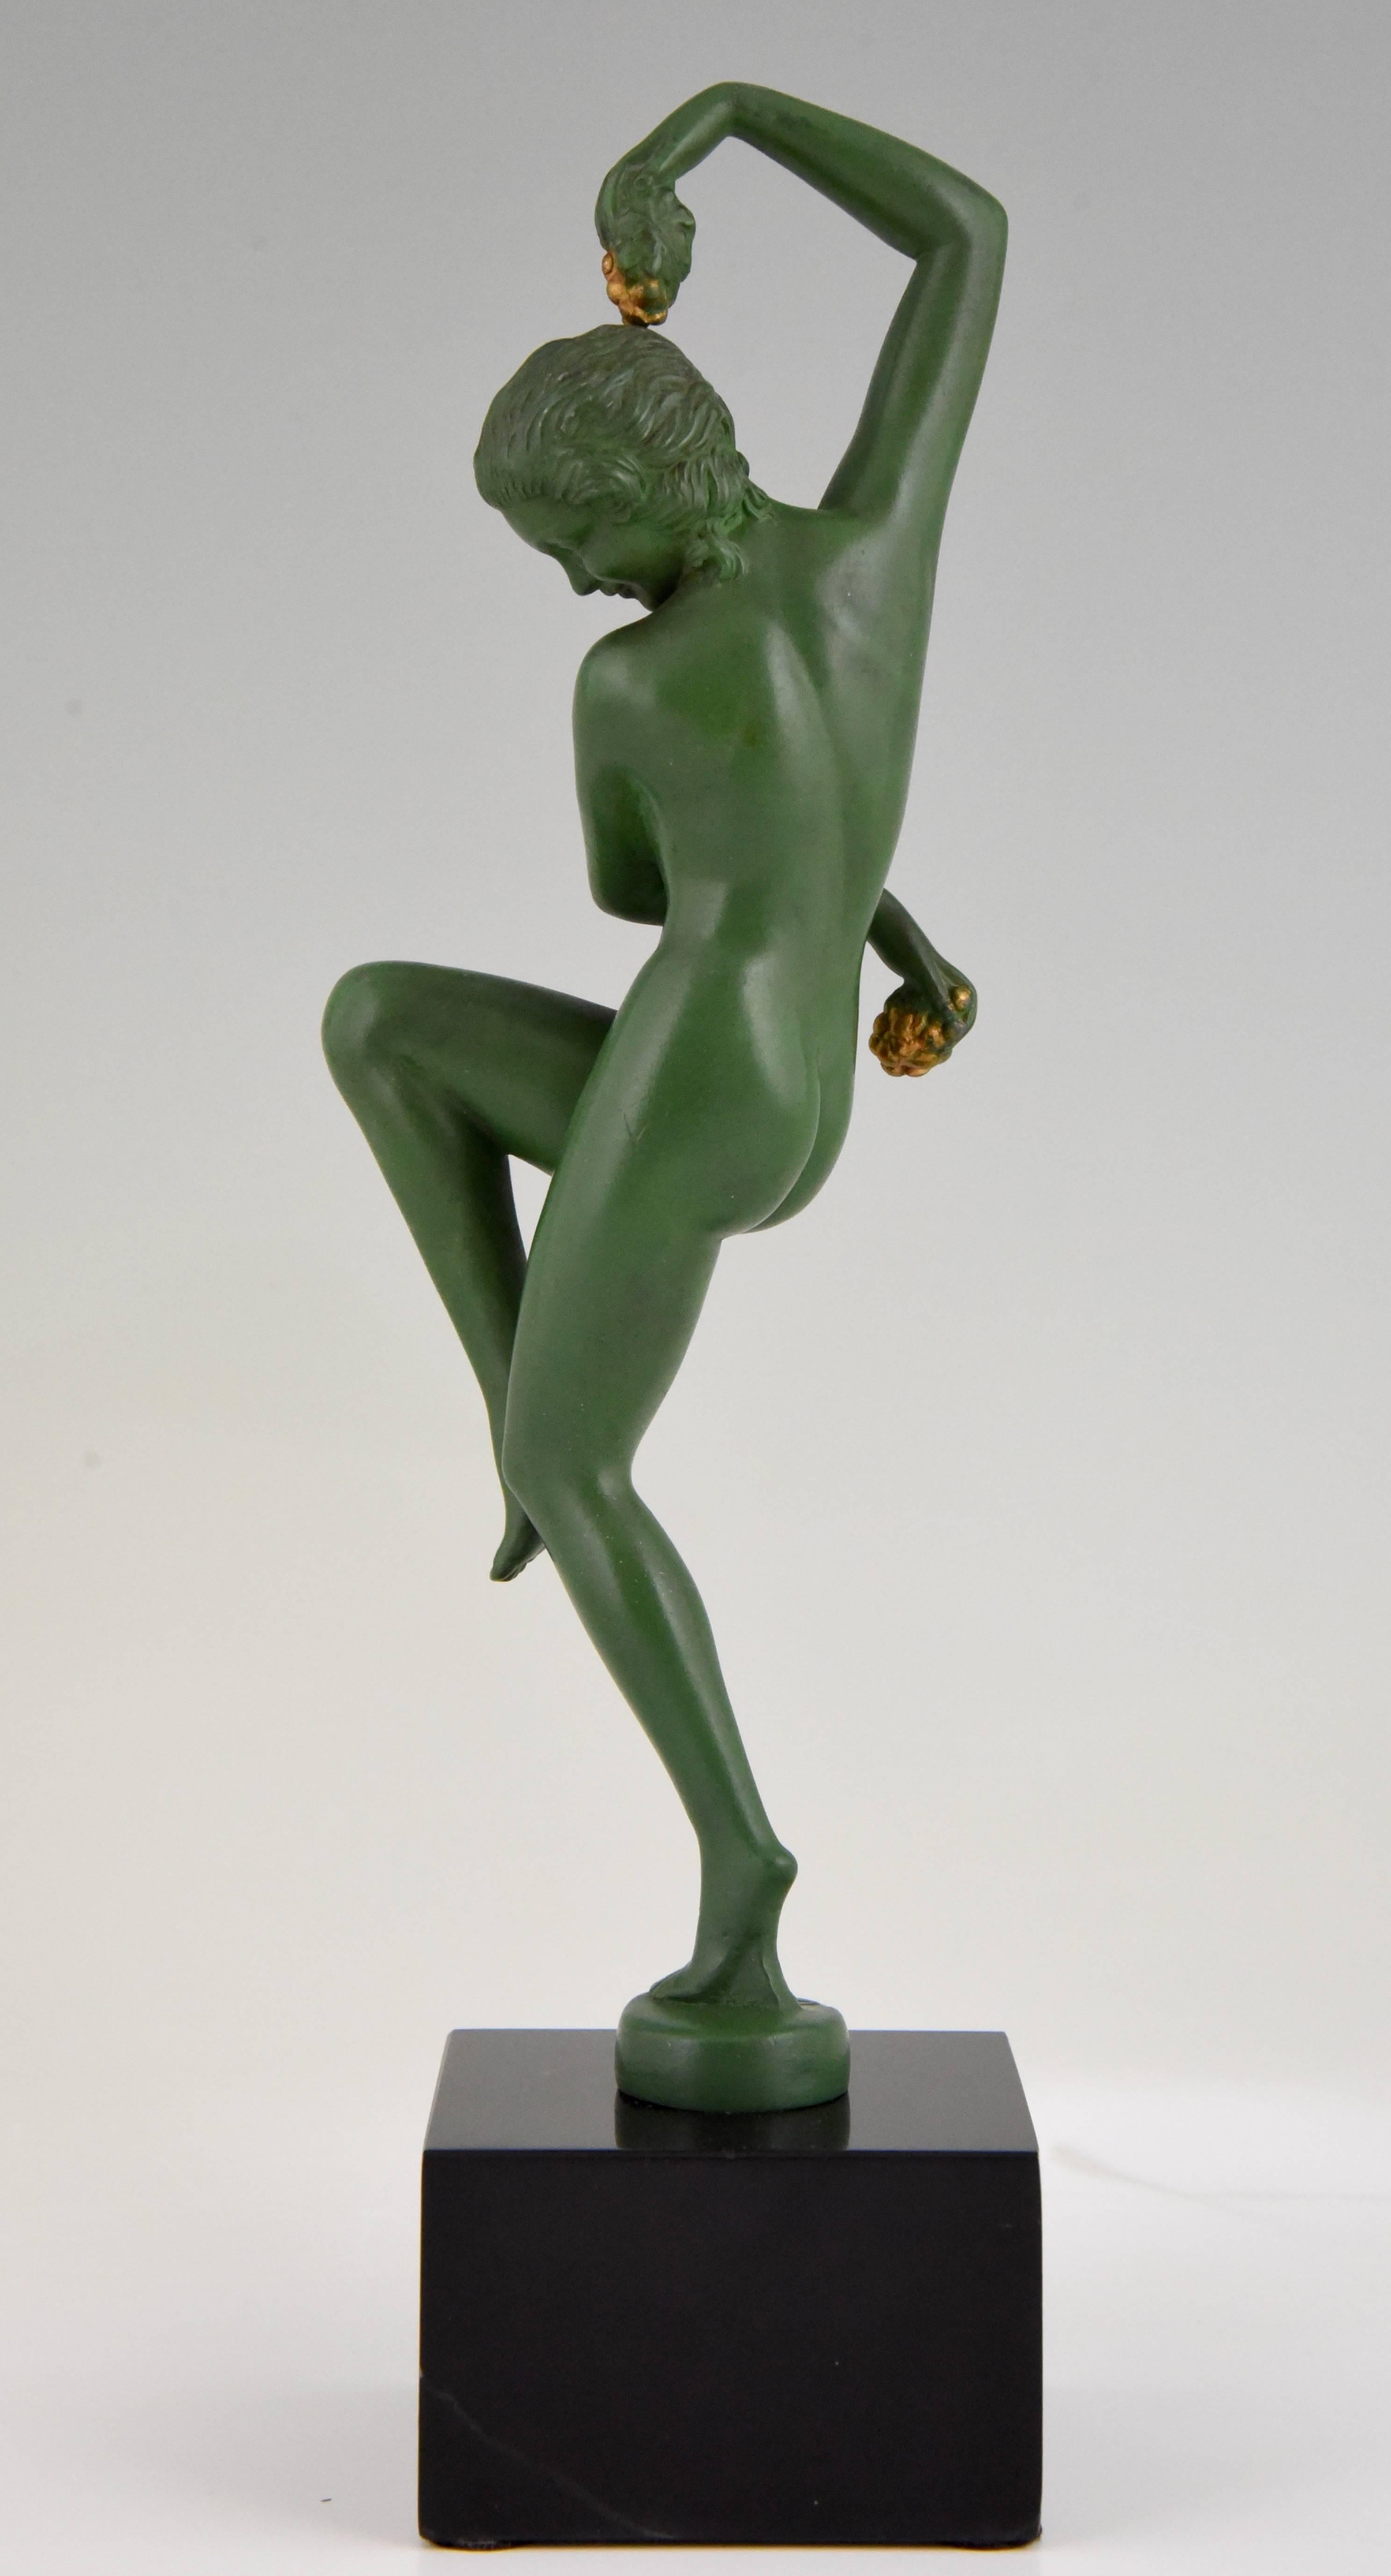 20th Century Art Deco Sculpture Nude Dancer with Grapes by Denis, 1930 France